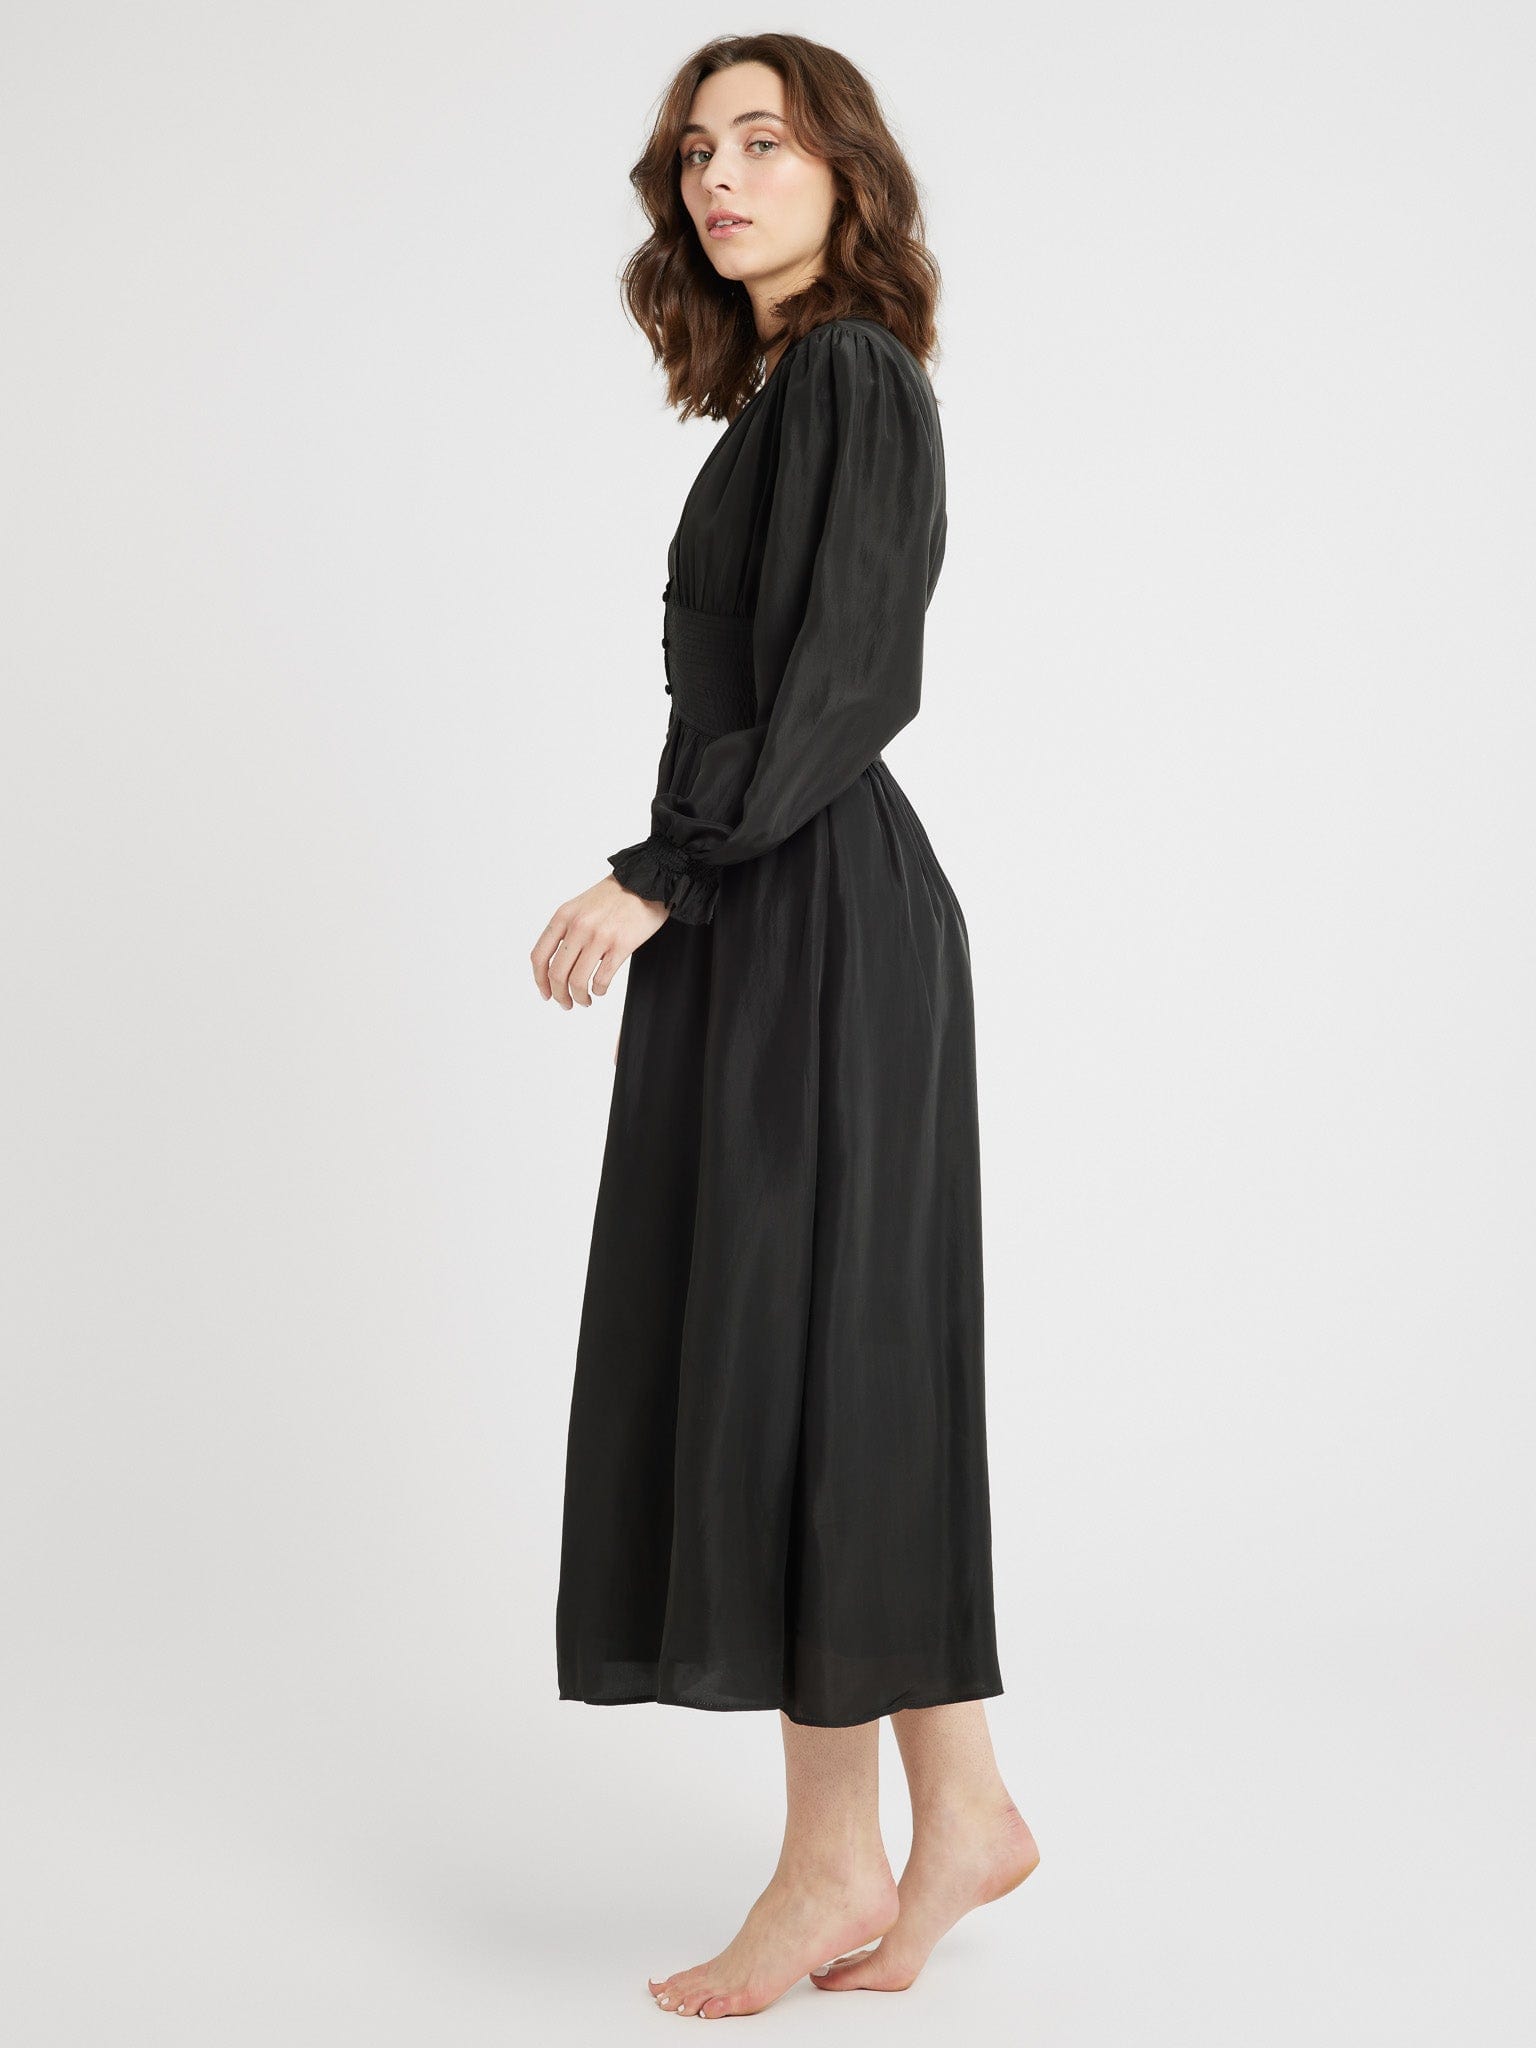 MILLE Clothing Anya Dress in Black Washed Silk